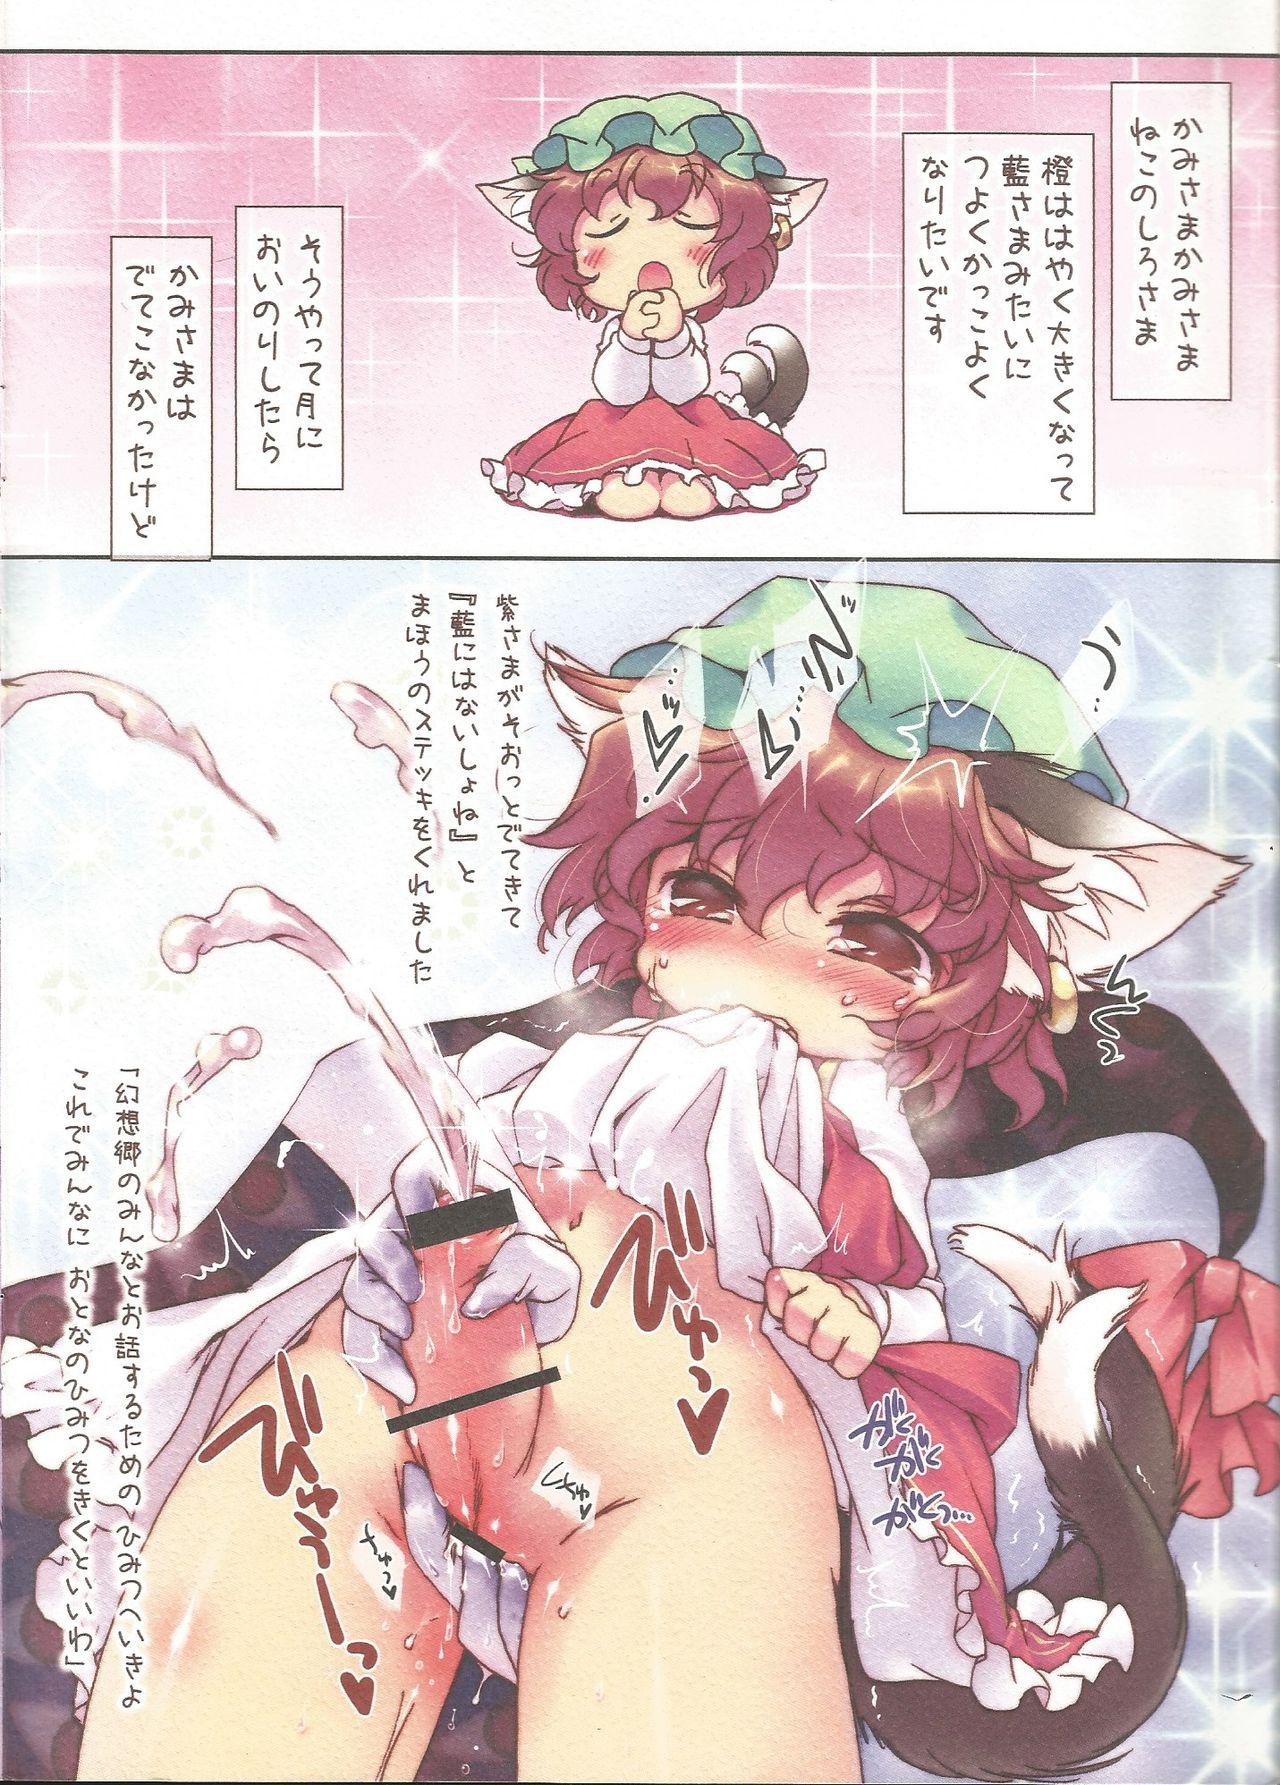 Ametuer Porn Chenko! - Touhou project Arabe - Page 2